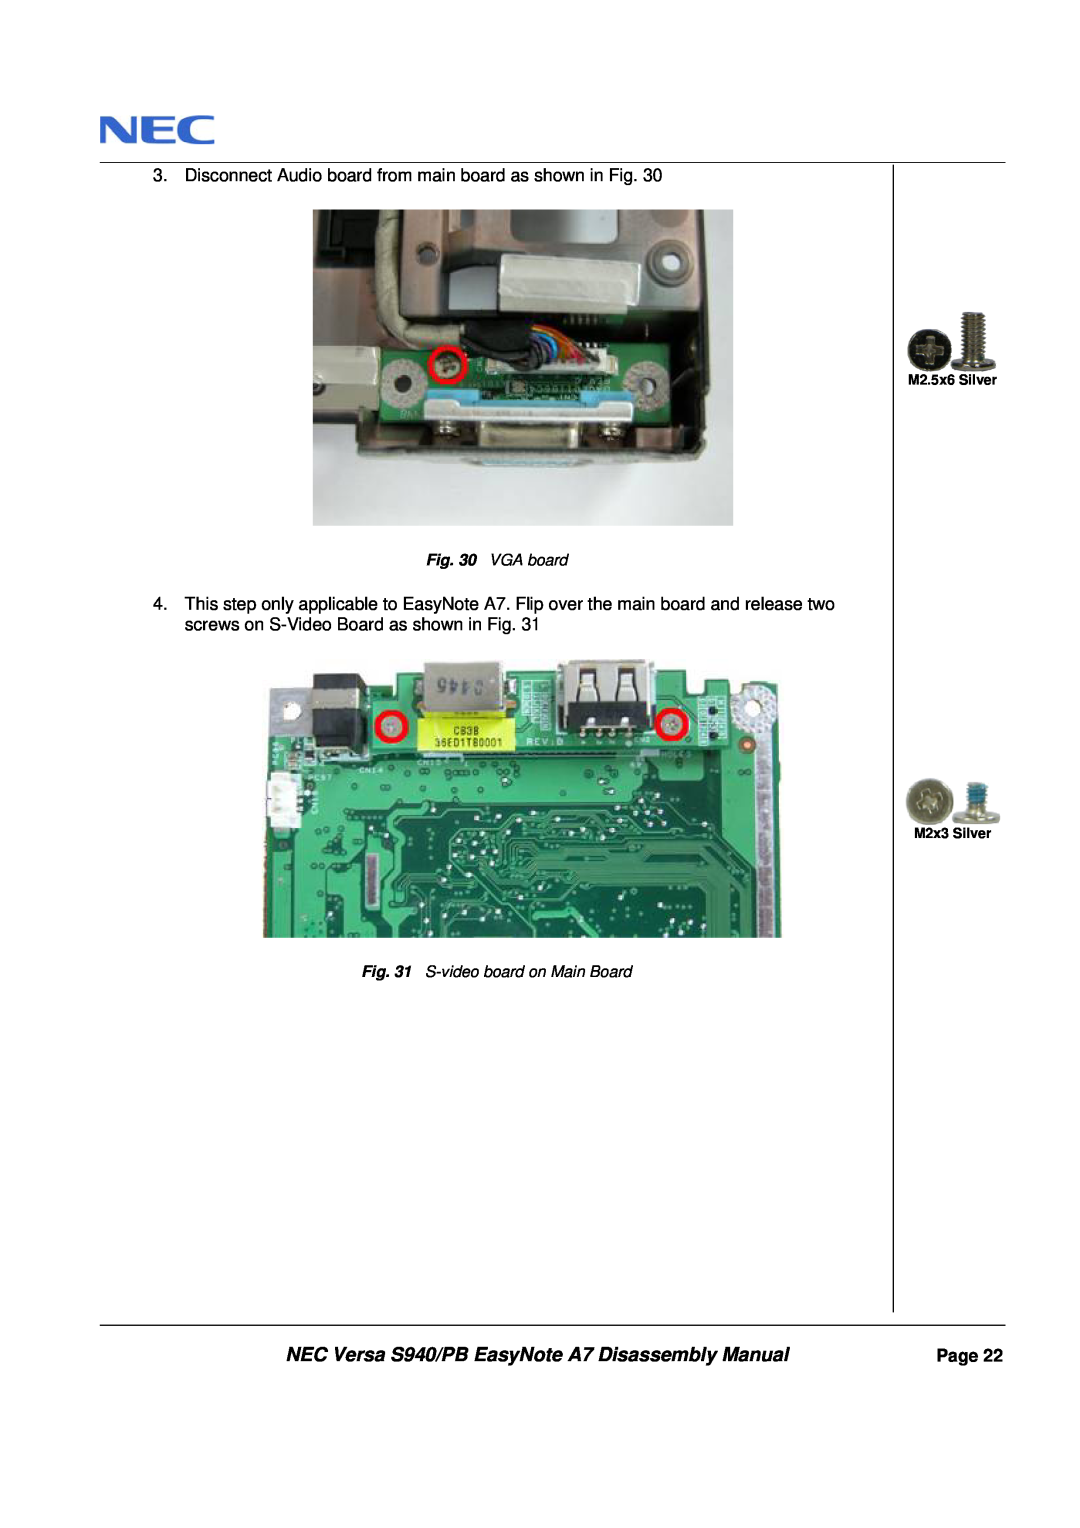 Packard Bell manual NEC Versa S940/PB EasyNote A7 Disassembly Manual, VGA board, S-video board on Main Board, Page 